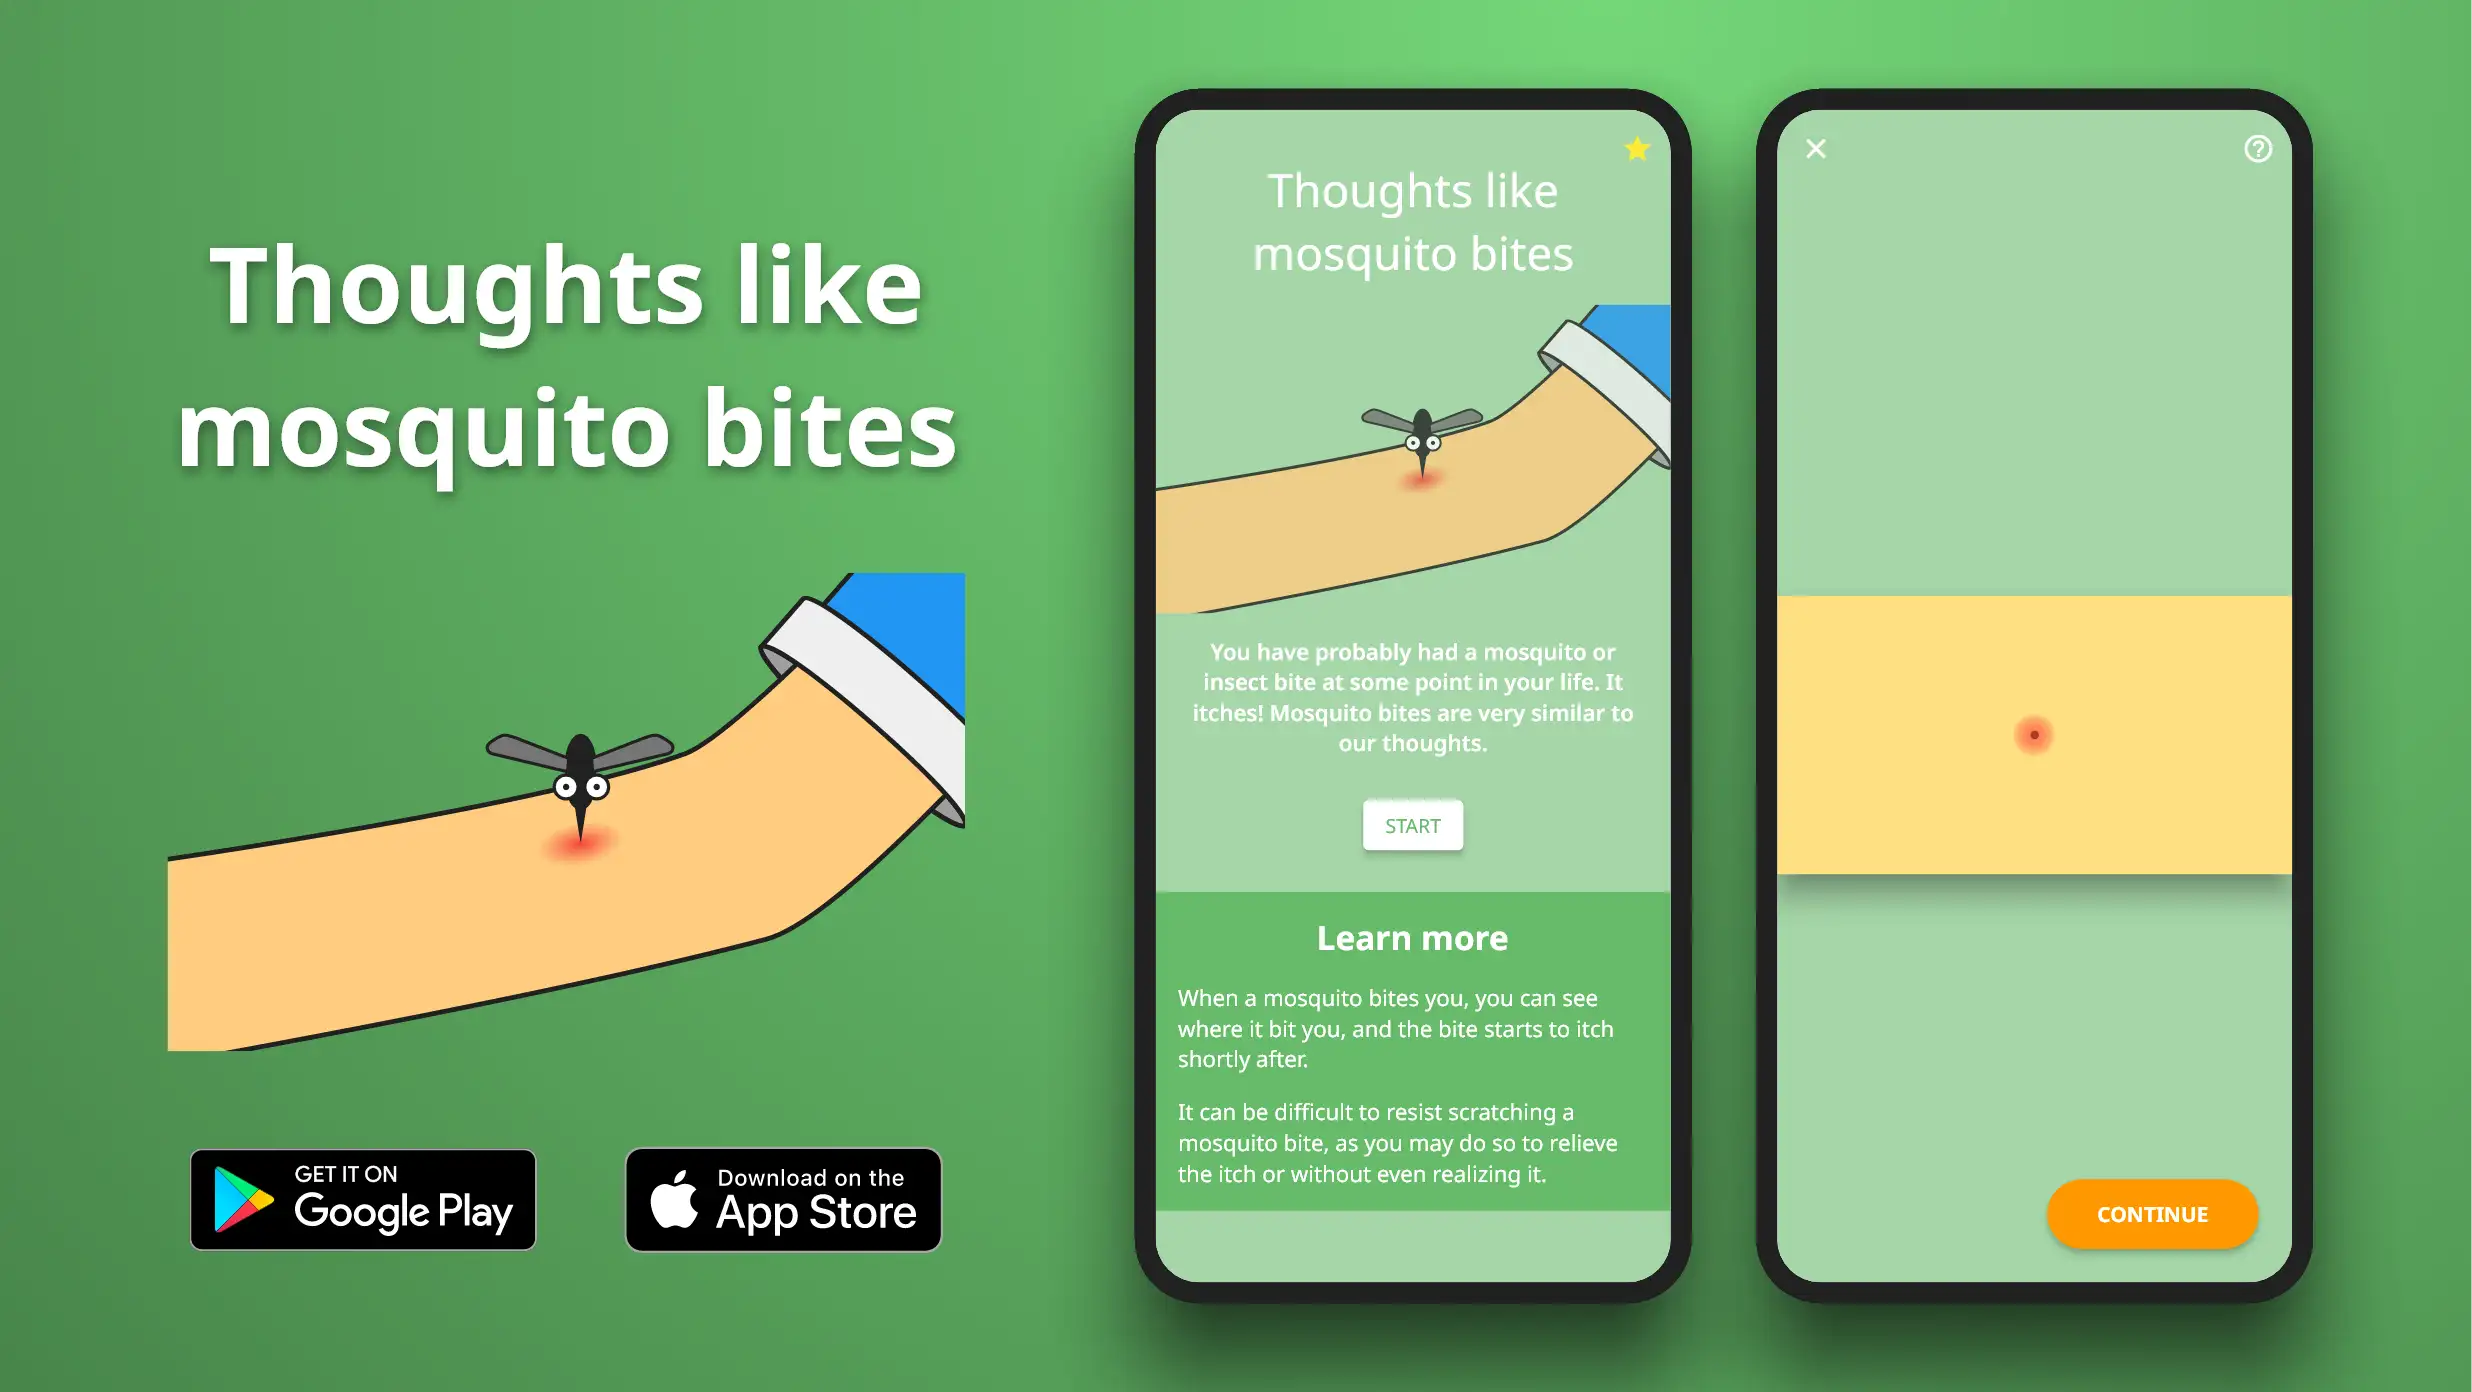 Thoughts like mosquito bites exercise in the Meta Learn app.